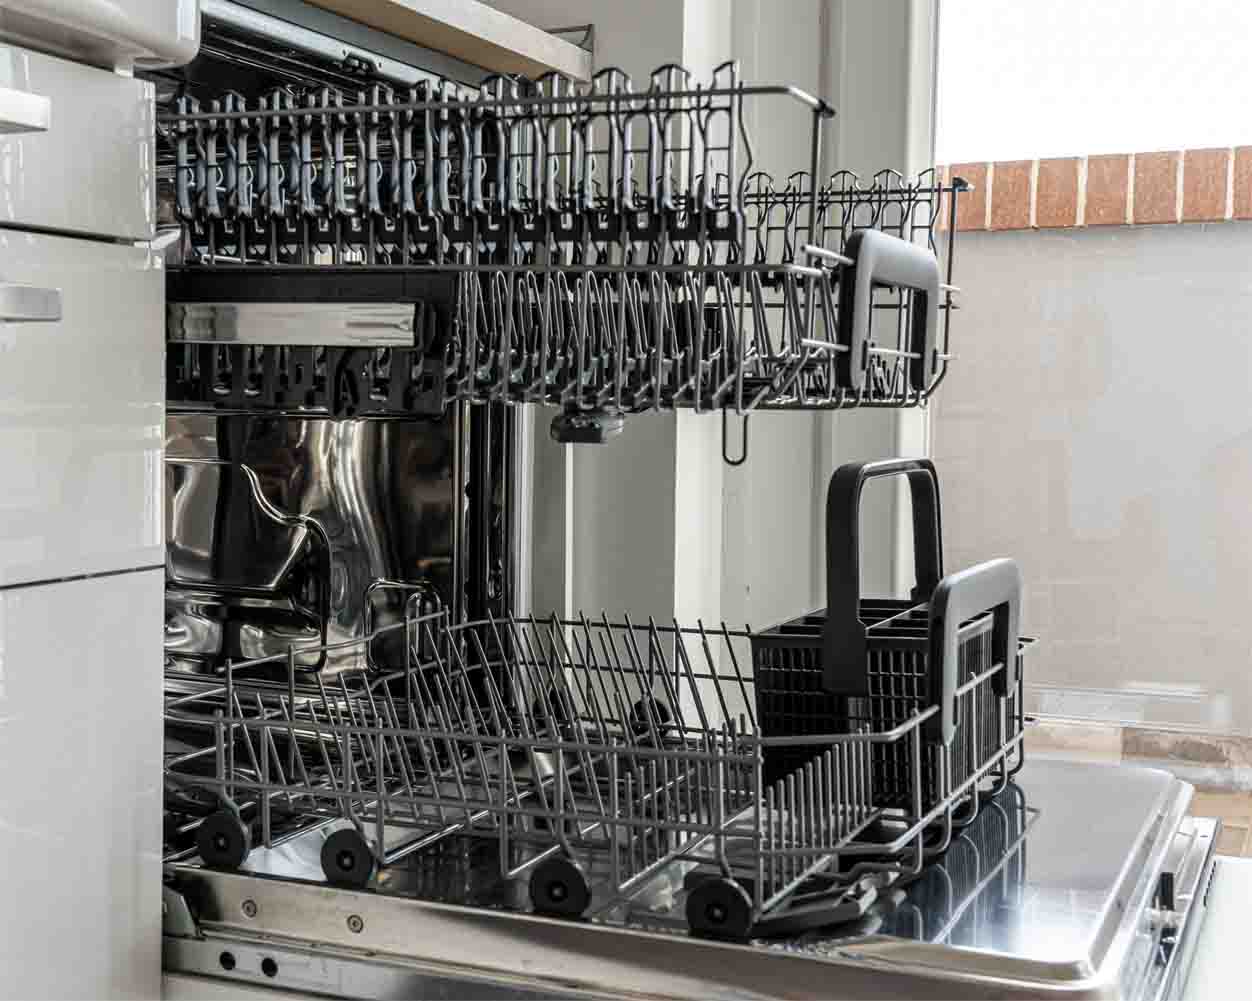 an open and empty rack of a dishwasher in a kitchen